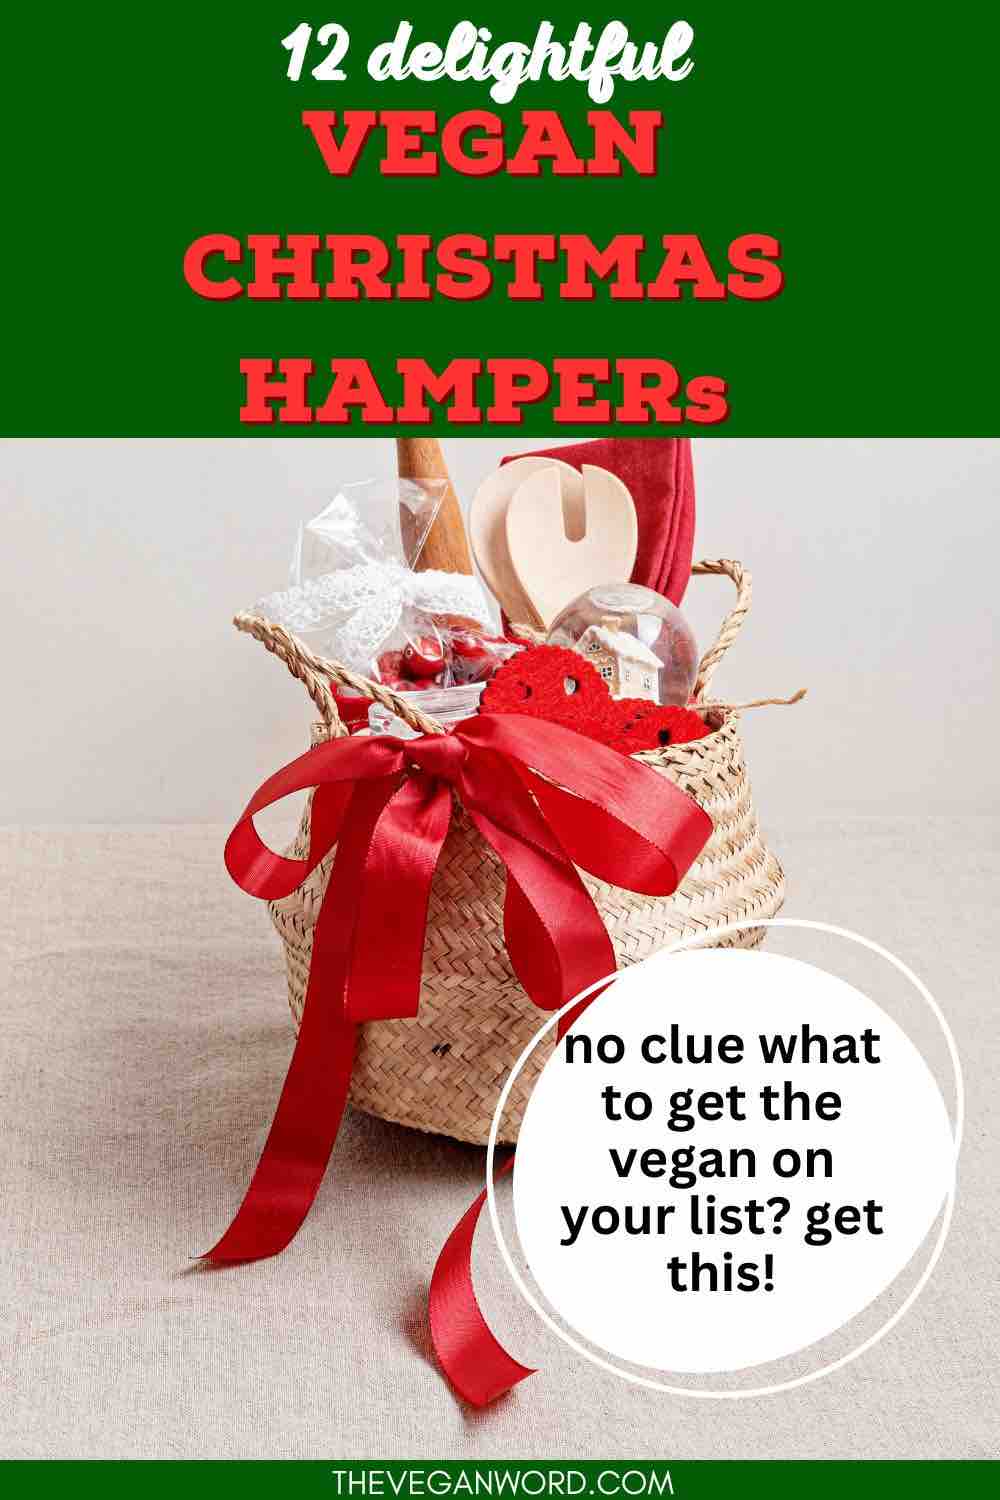 Pinterest image showing a gift basket with a red bow with text that reads "12 delightful vegan christmas hampers: no clue what to get the vegan on your list? get this"